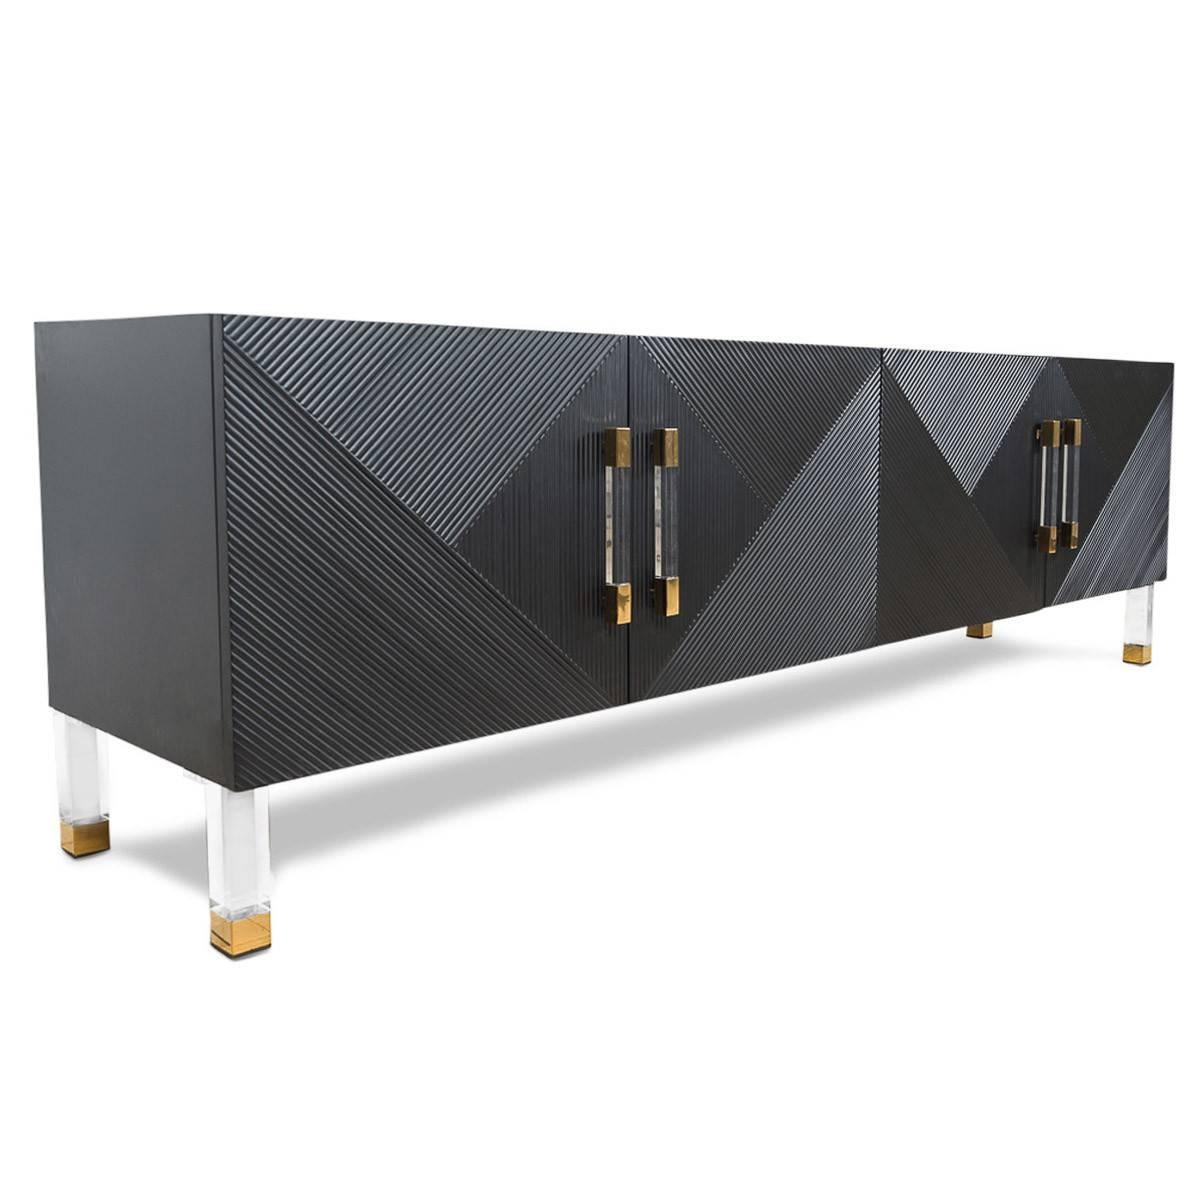 This credenza exudes elegance featuring bevelled line work creating an interesting and unique pattern amongst the facade of this credenza. Along with the Lucite and brass bar pulls and legs, this is sure to make a bold statement in any elegant